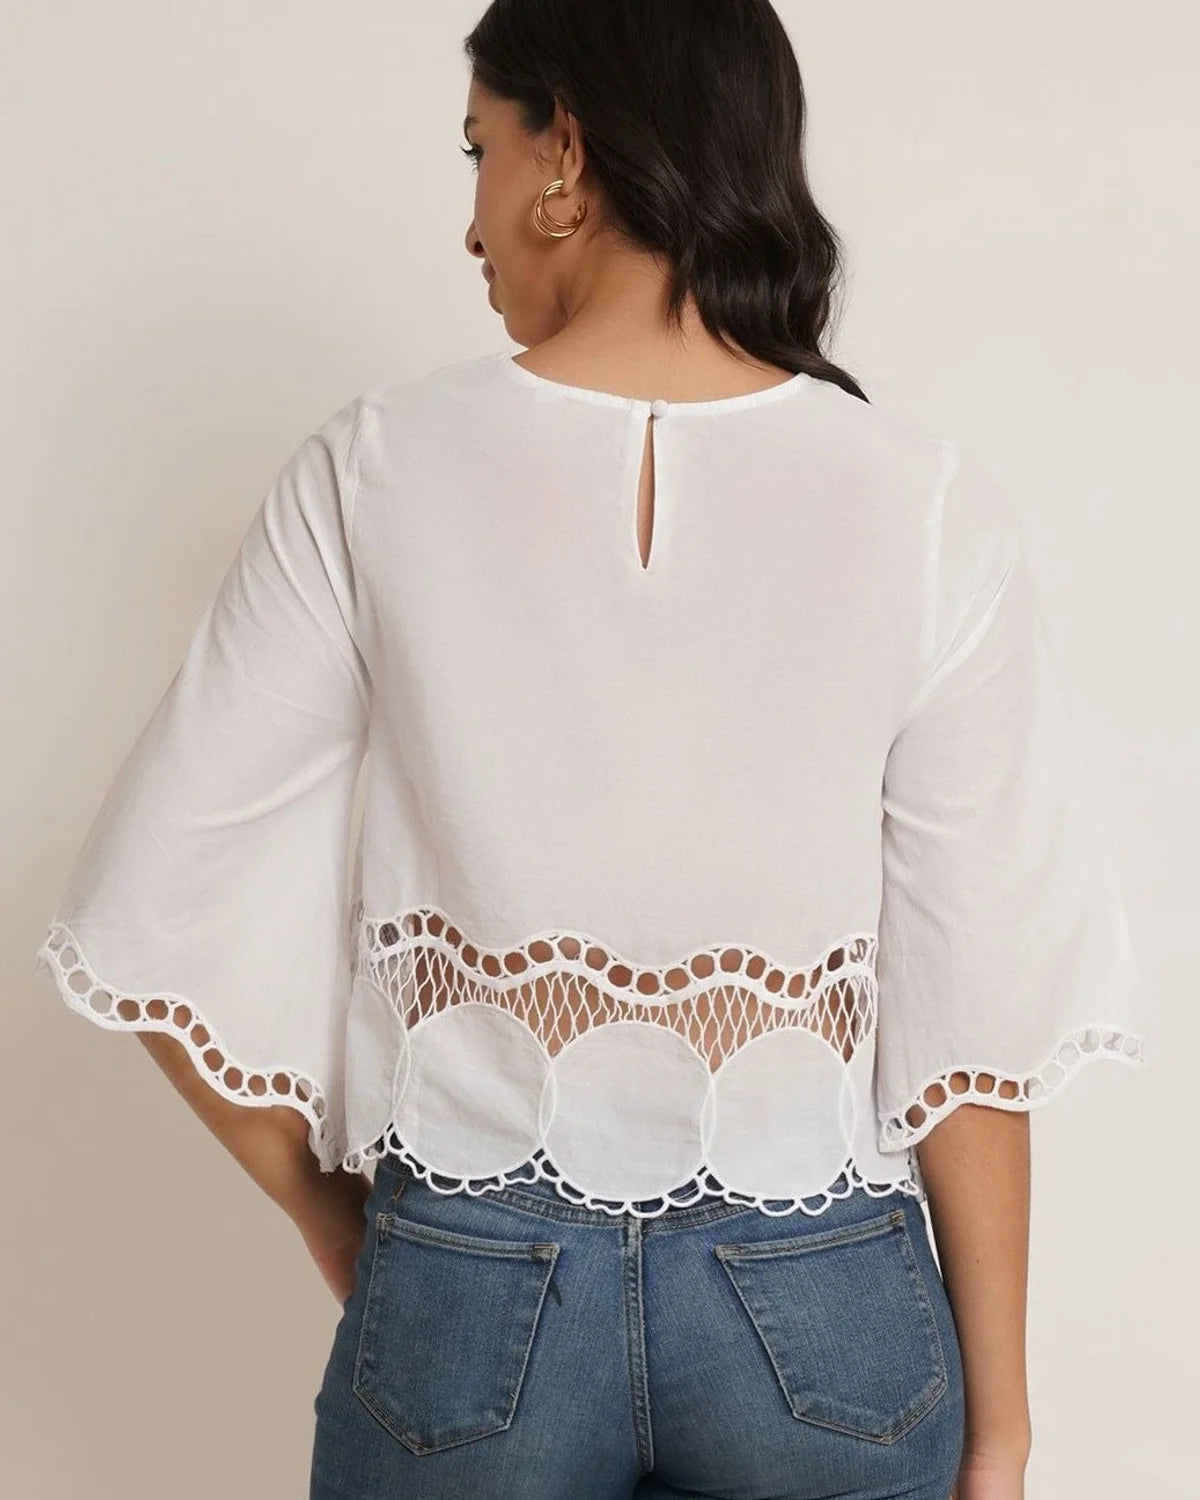 LACE WORK A-LINE TOP,a line, casual, cotton, crew neck, elbow length sleeves, flared sleeves, lace, regular, relaxed fit, scalloped, soft girl, solid, summer, tops, topwear, white, woven,a-line-laced-top,Neck - Crew neckSleeve - Flared sleeve Fit - Relaxed fit Print/Pattern - Solid Color - WhiteMaterial - CottonDetail - Lace work